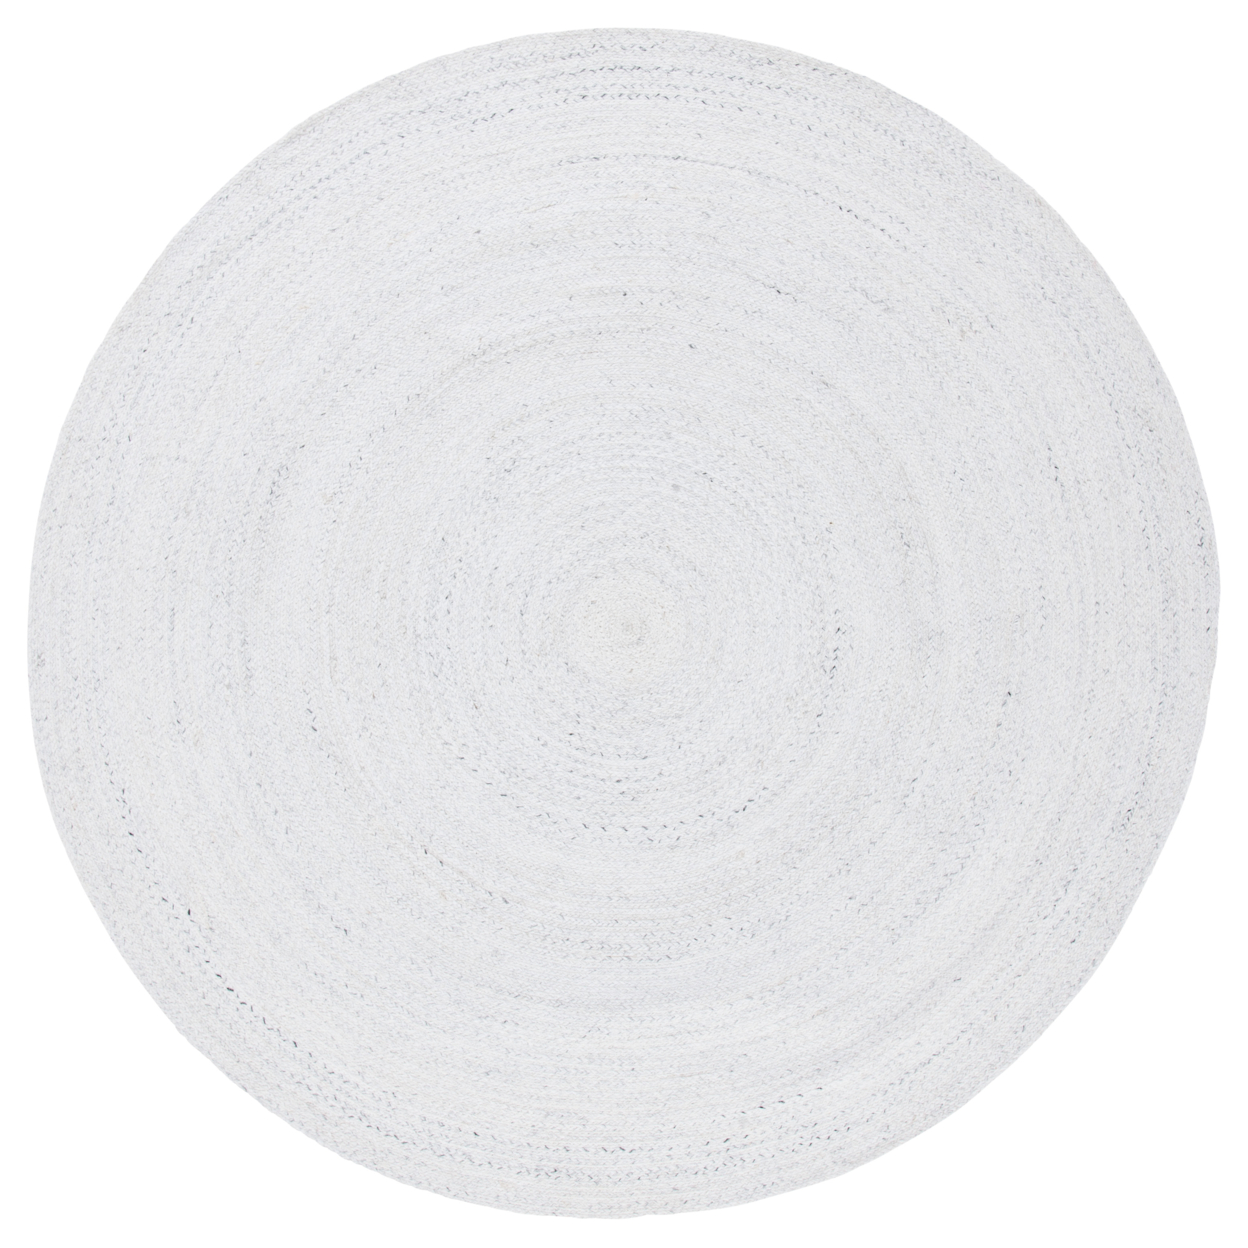 SAFAVIEH Cape Cod Collection CAP224A Handwoven Ivory Rug - 6' Round